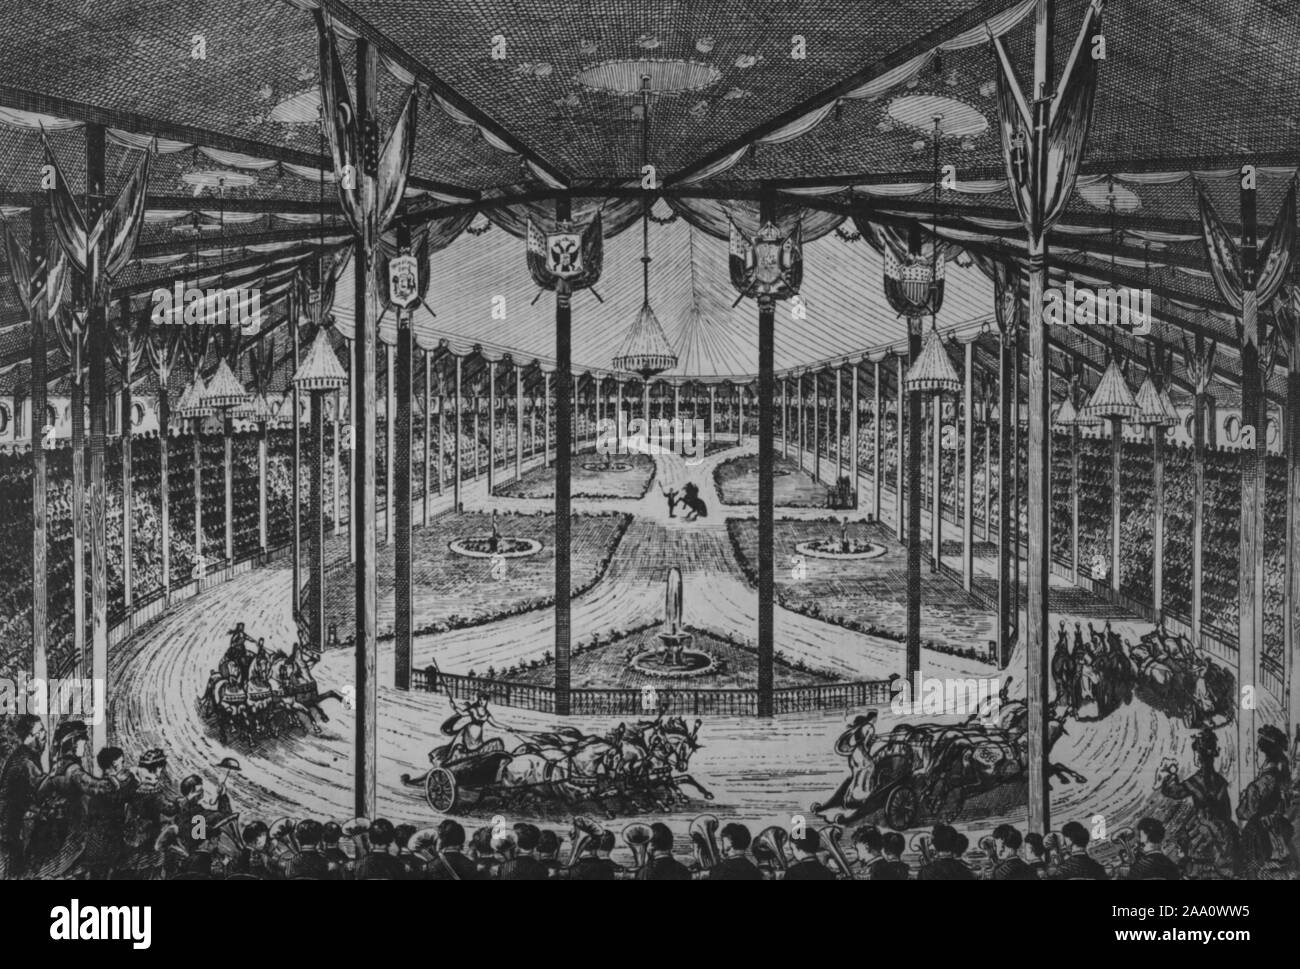 Monochrome illustration of the interior view of Phineas Taylor Barnum's Great Roman Hippodrome in Madison Square Garden, New York City, featuring people riding horse-drawn chariots, published in the Daily Graphic Newspaper, 1874. From the New York Public Library. () Stock Photo